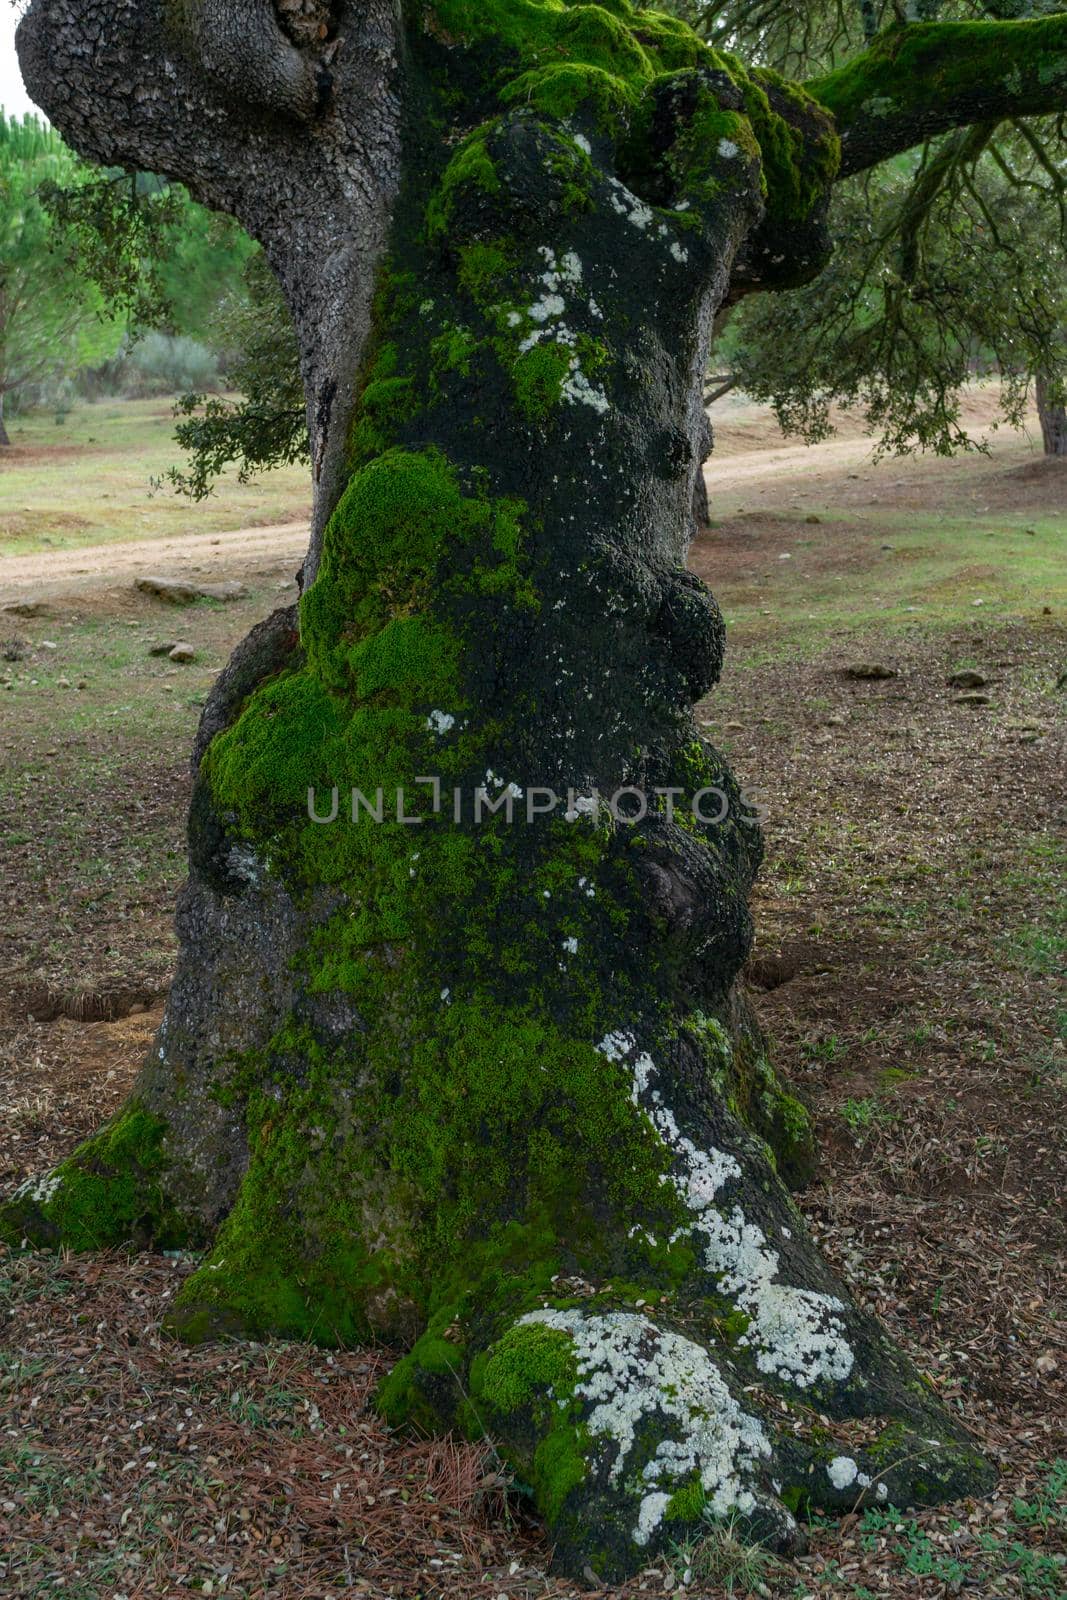 holm oak or Quercus ilex in the foreground with moss on the trunk forest colors